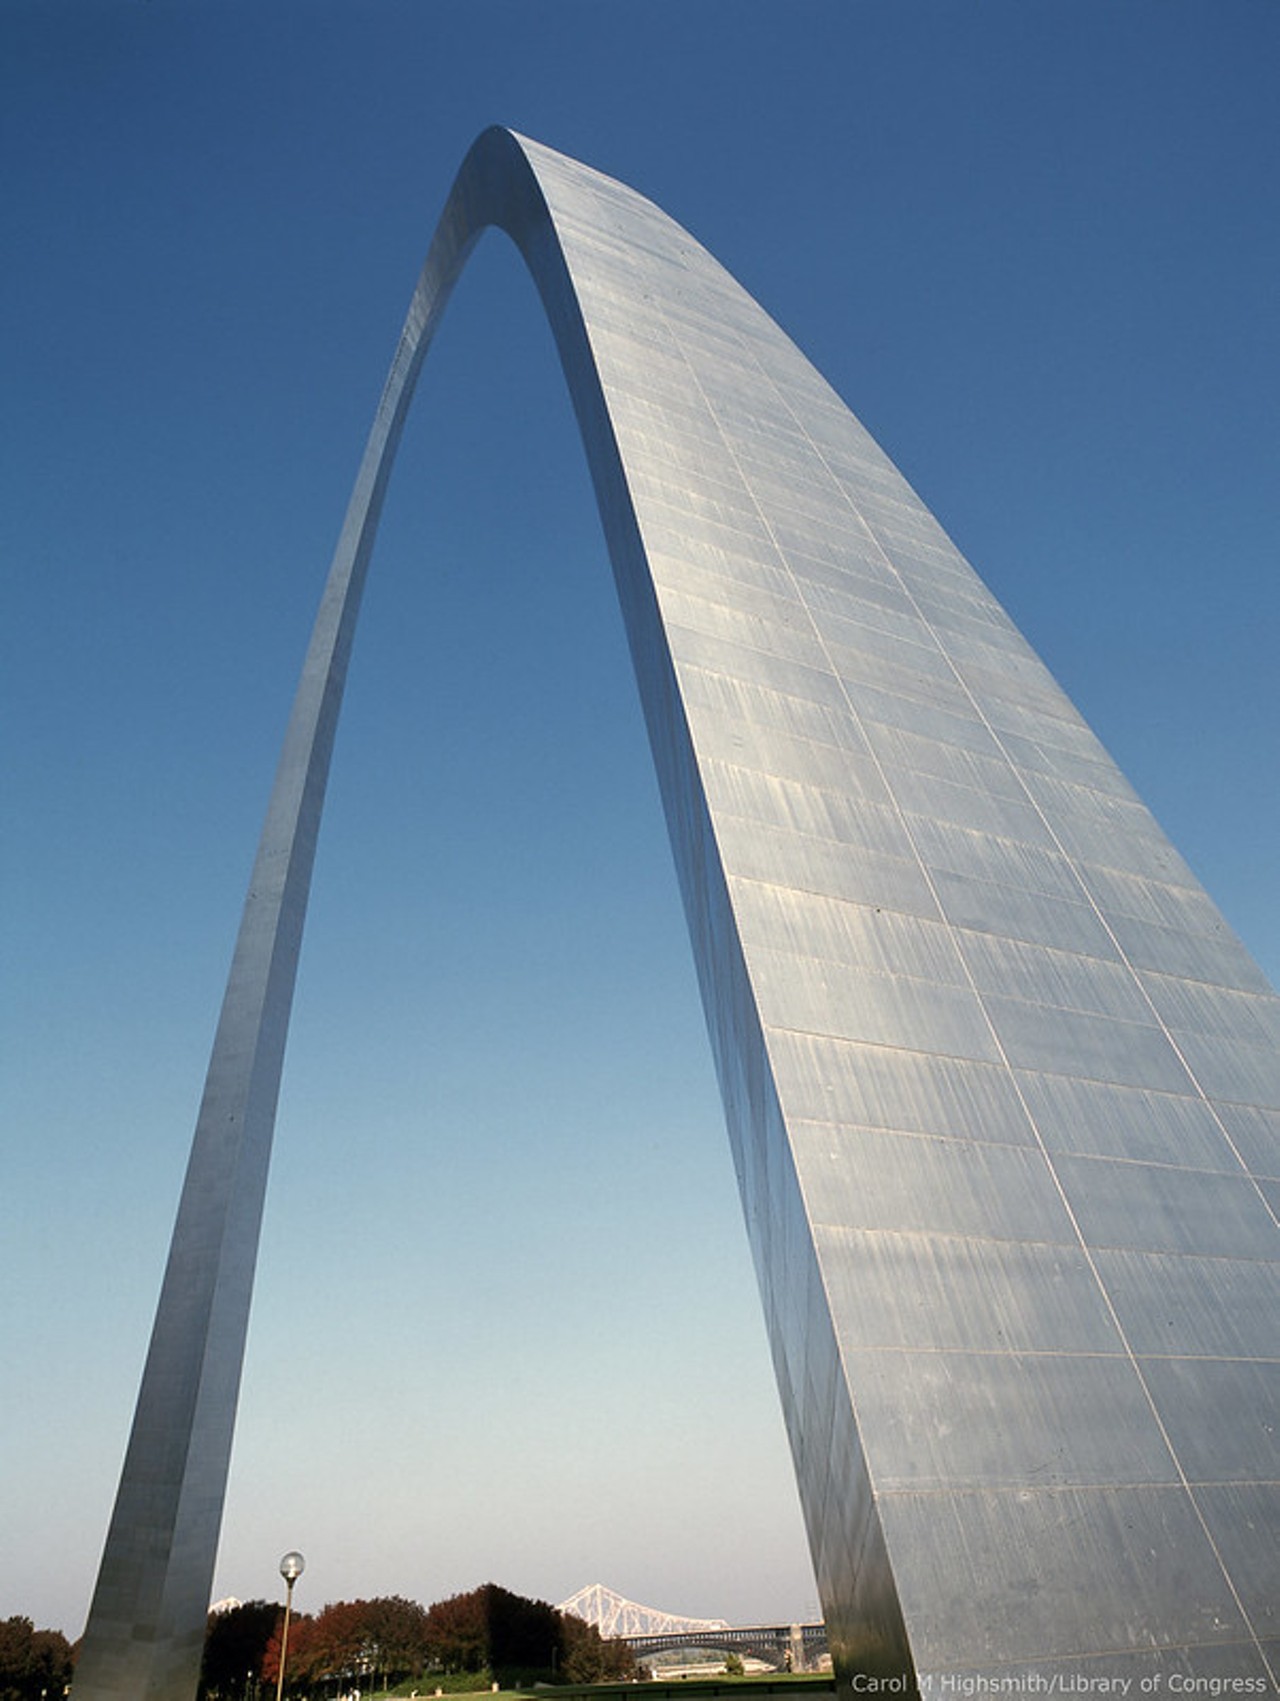 The Gateway Arch
Located in Downtown St. Louis (5595 Grand Drive)
Simply visiting is free. Tram ride to the top of the arch is $12-$16 for adults and $8-$12 for children ages 3-15
Photo credit: GPA Photo Archive / Flickr